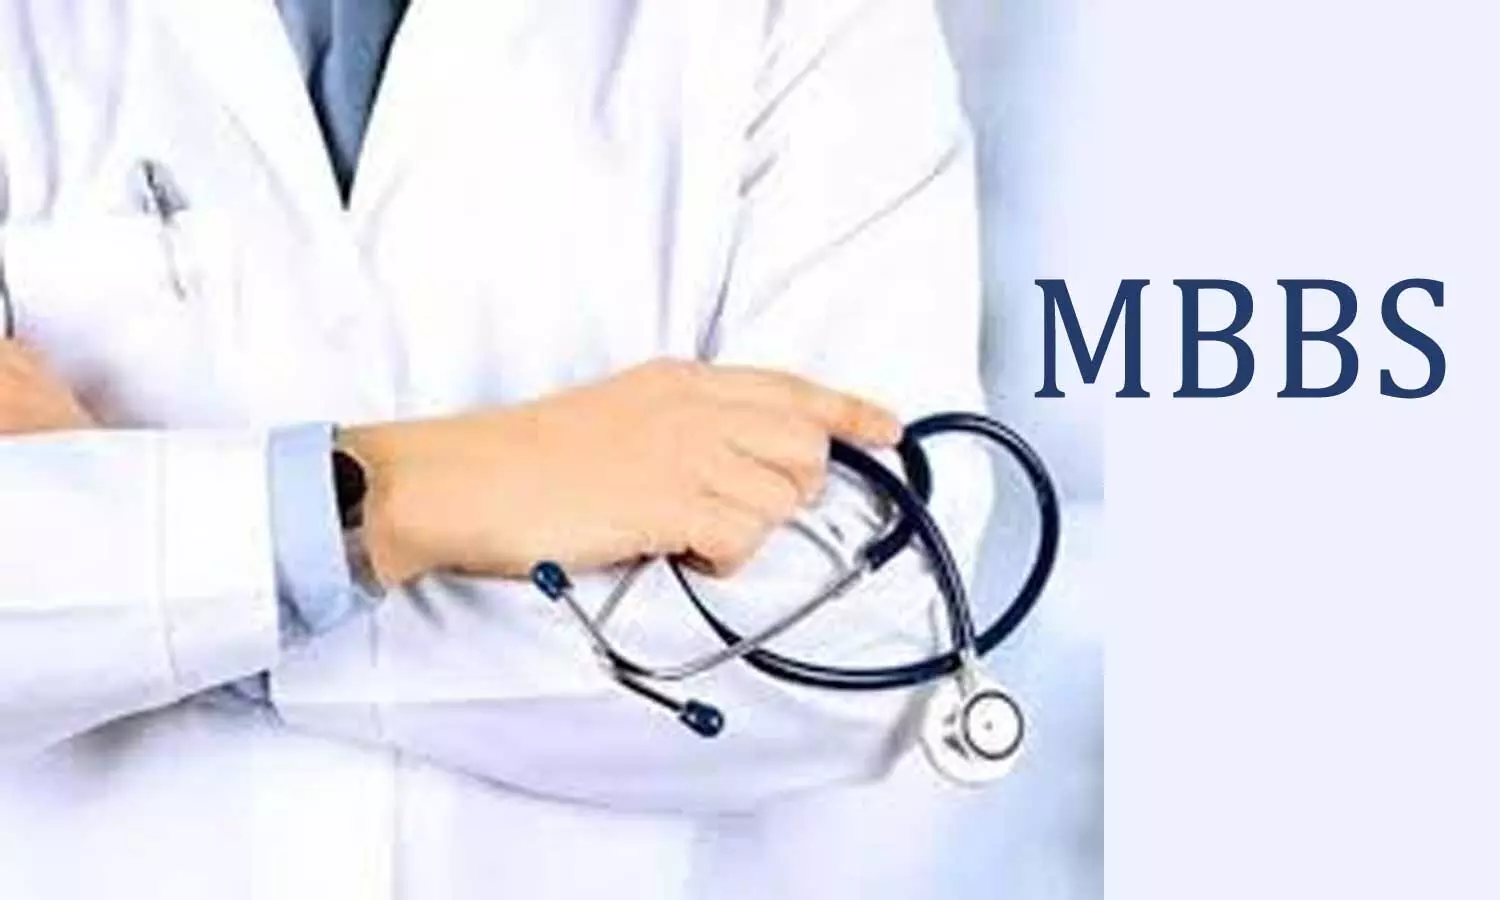 JIPMER informs on Payment of Exit Exam Fee for 2nd MBBS, Final Year Part I August 2020